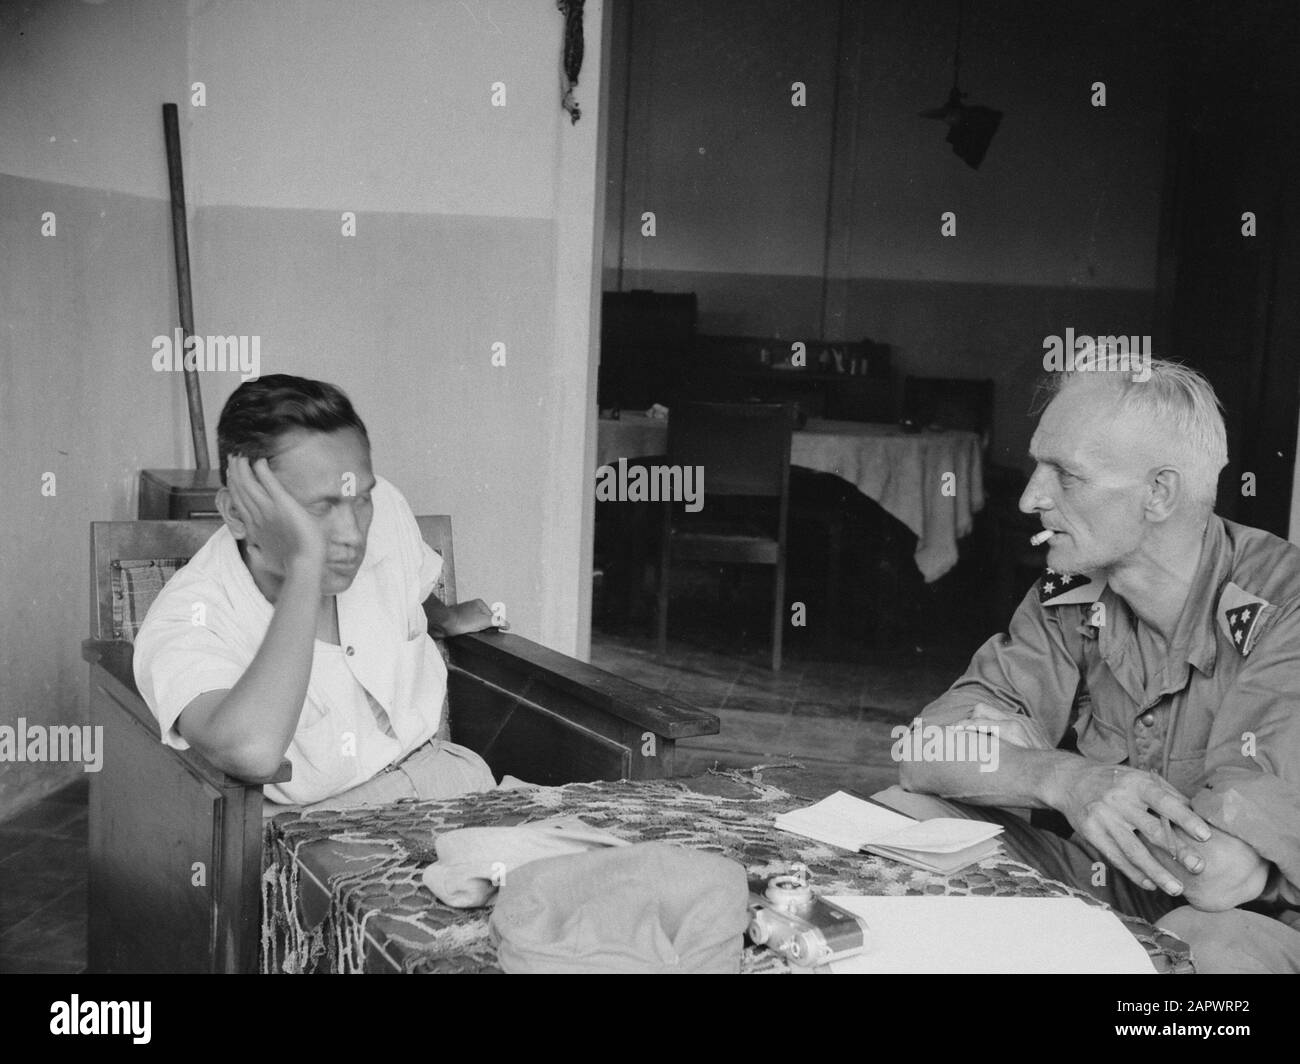 Advances from Fort de Kock to Pajancombo (in Baso)  [Dutch intelligence officer? in conversation or questioning with Indonesian man] Date: 23 December 1948 Location: Bukittinggi, Indonesia, Dutch East Indies, Sumatra Stock Photo